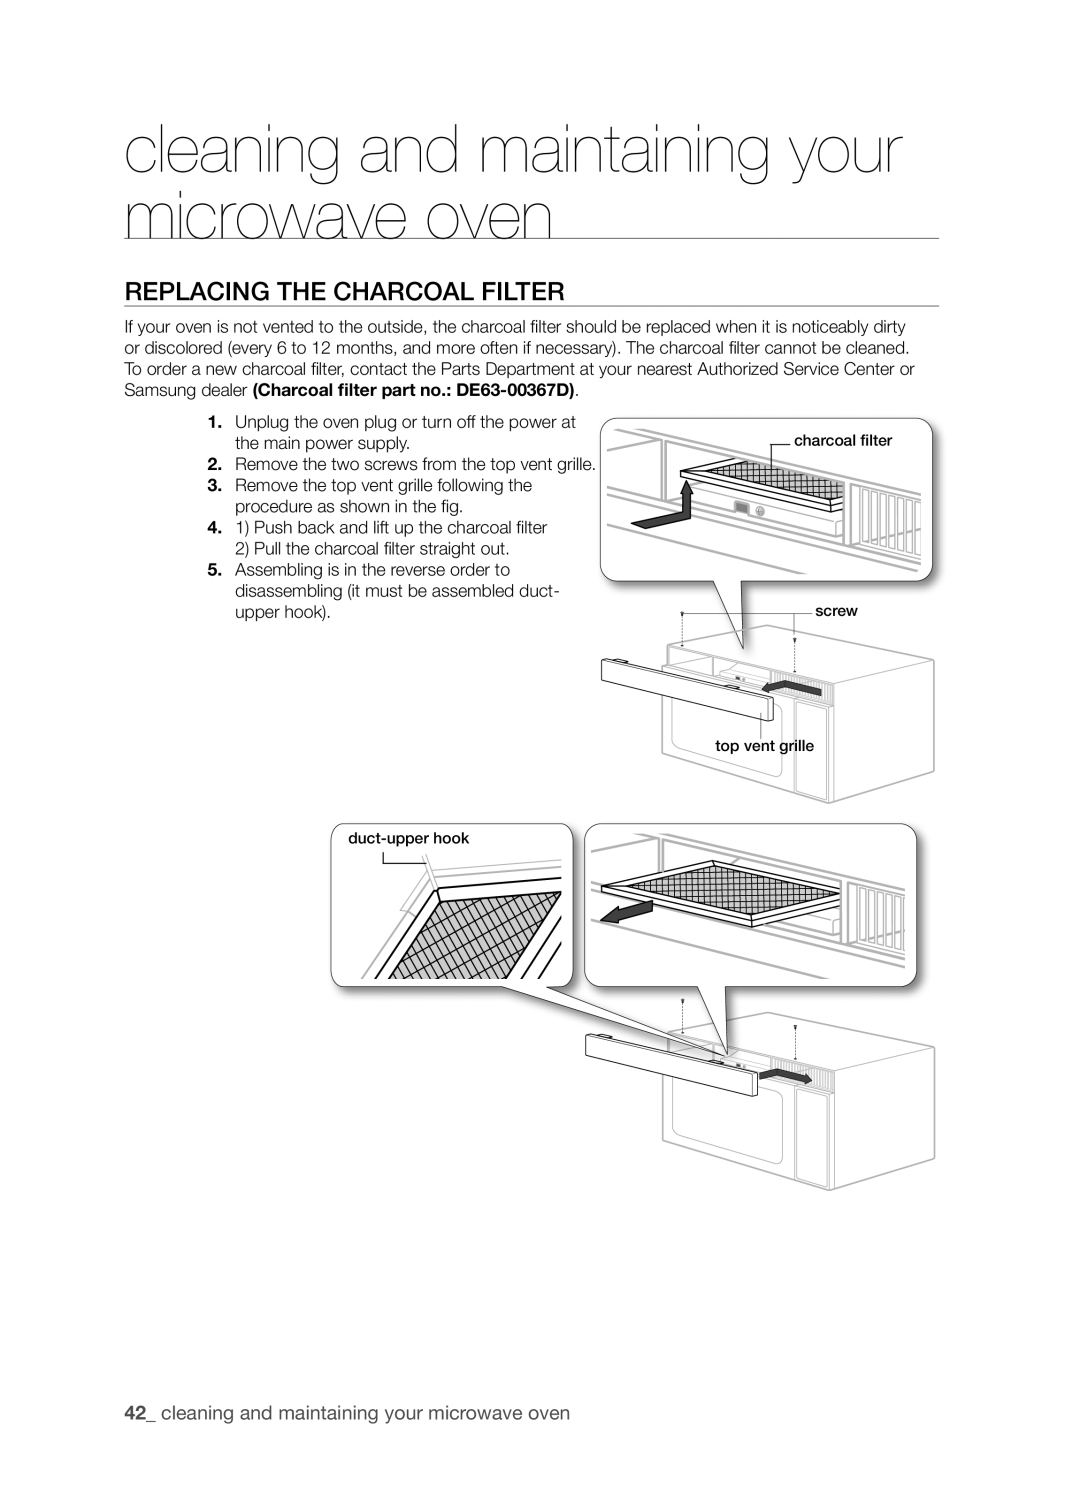 Samsung SMH9207ST user manual Replacing The Charcoal Filter, cleaning and maintaining your microwave oven 